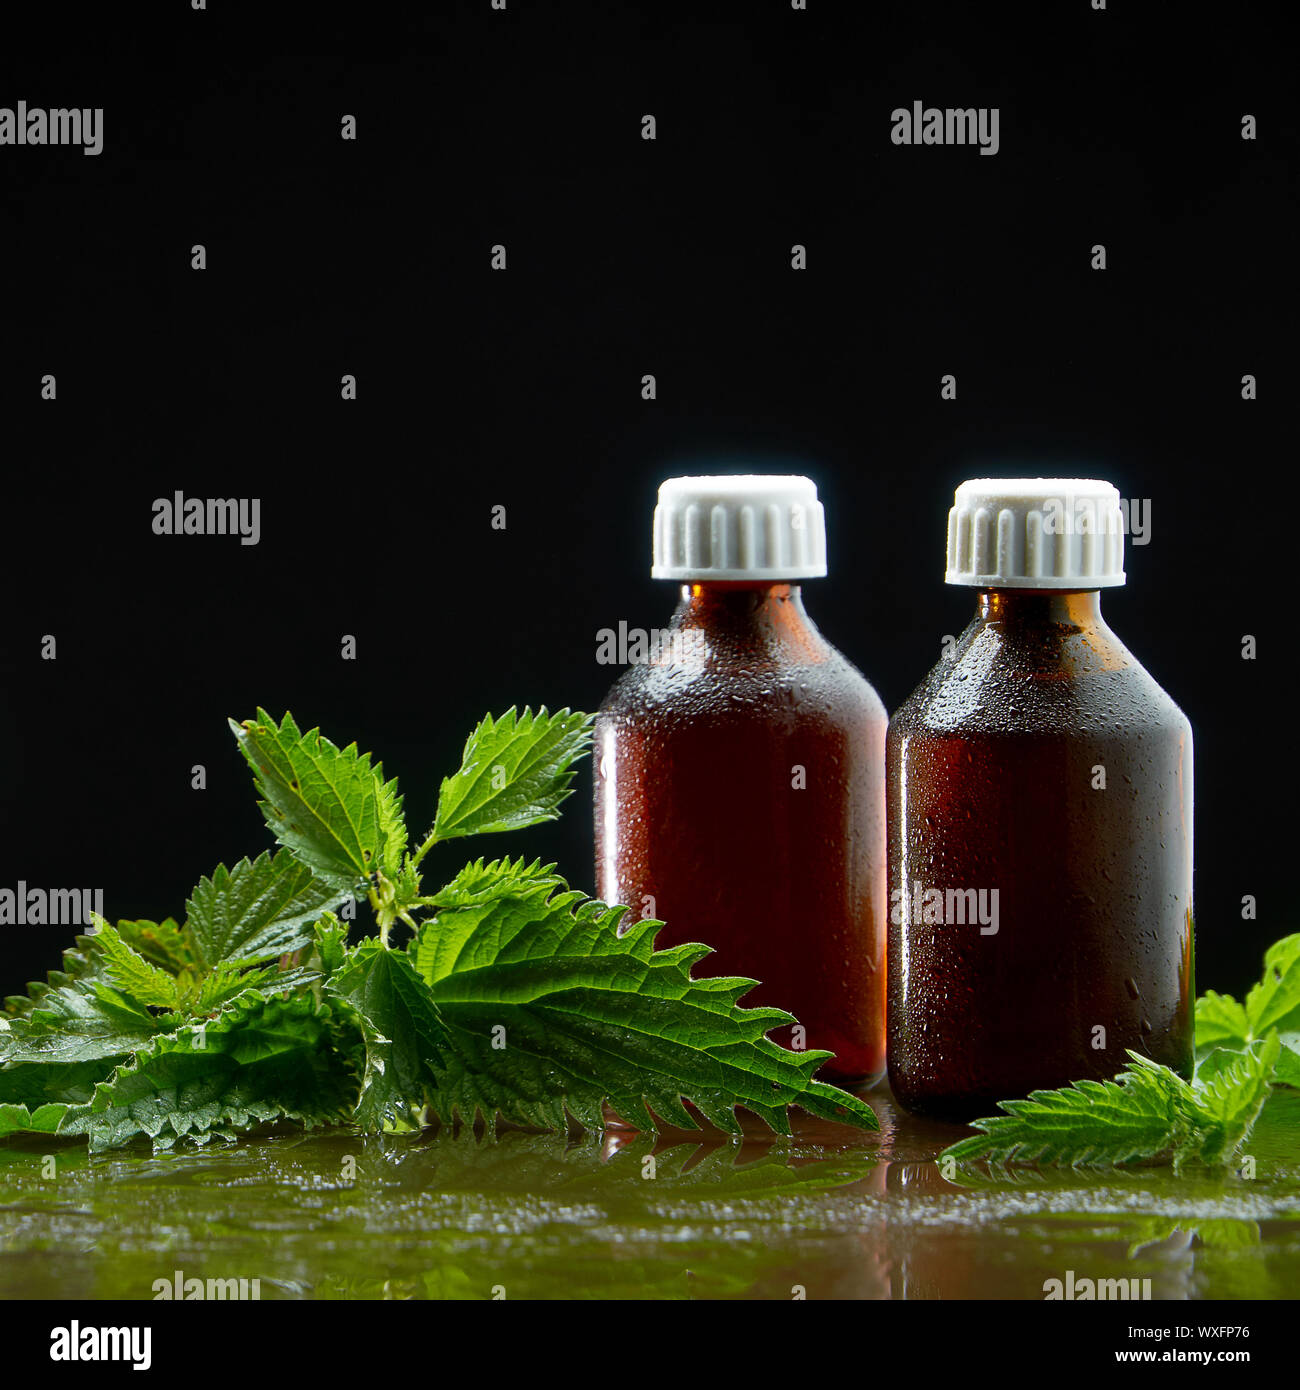 Two jars with a medical infusion of a decoction of nettle with nettle leaves on a black background Stock Photo